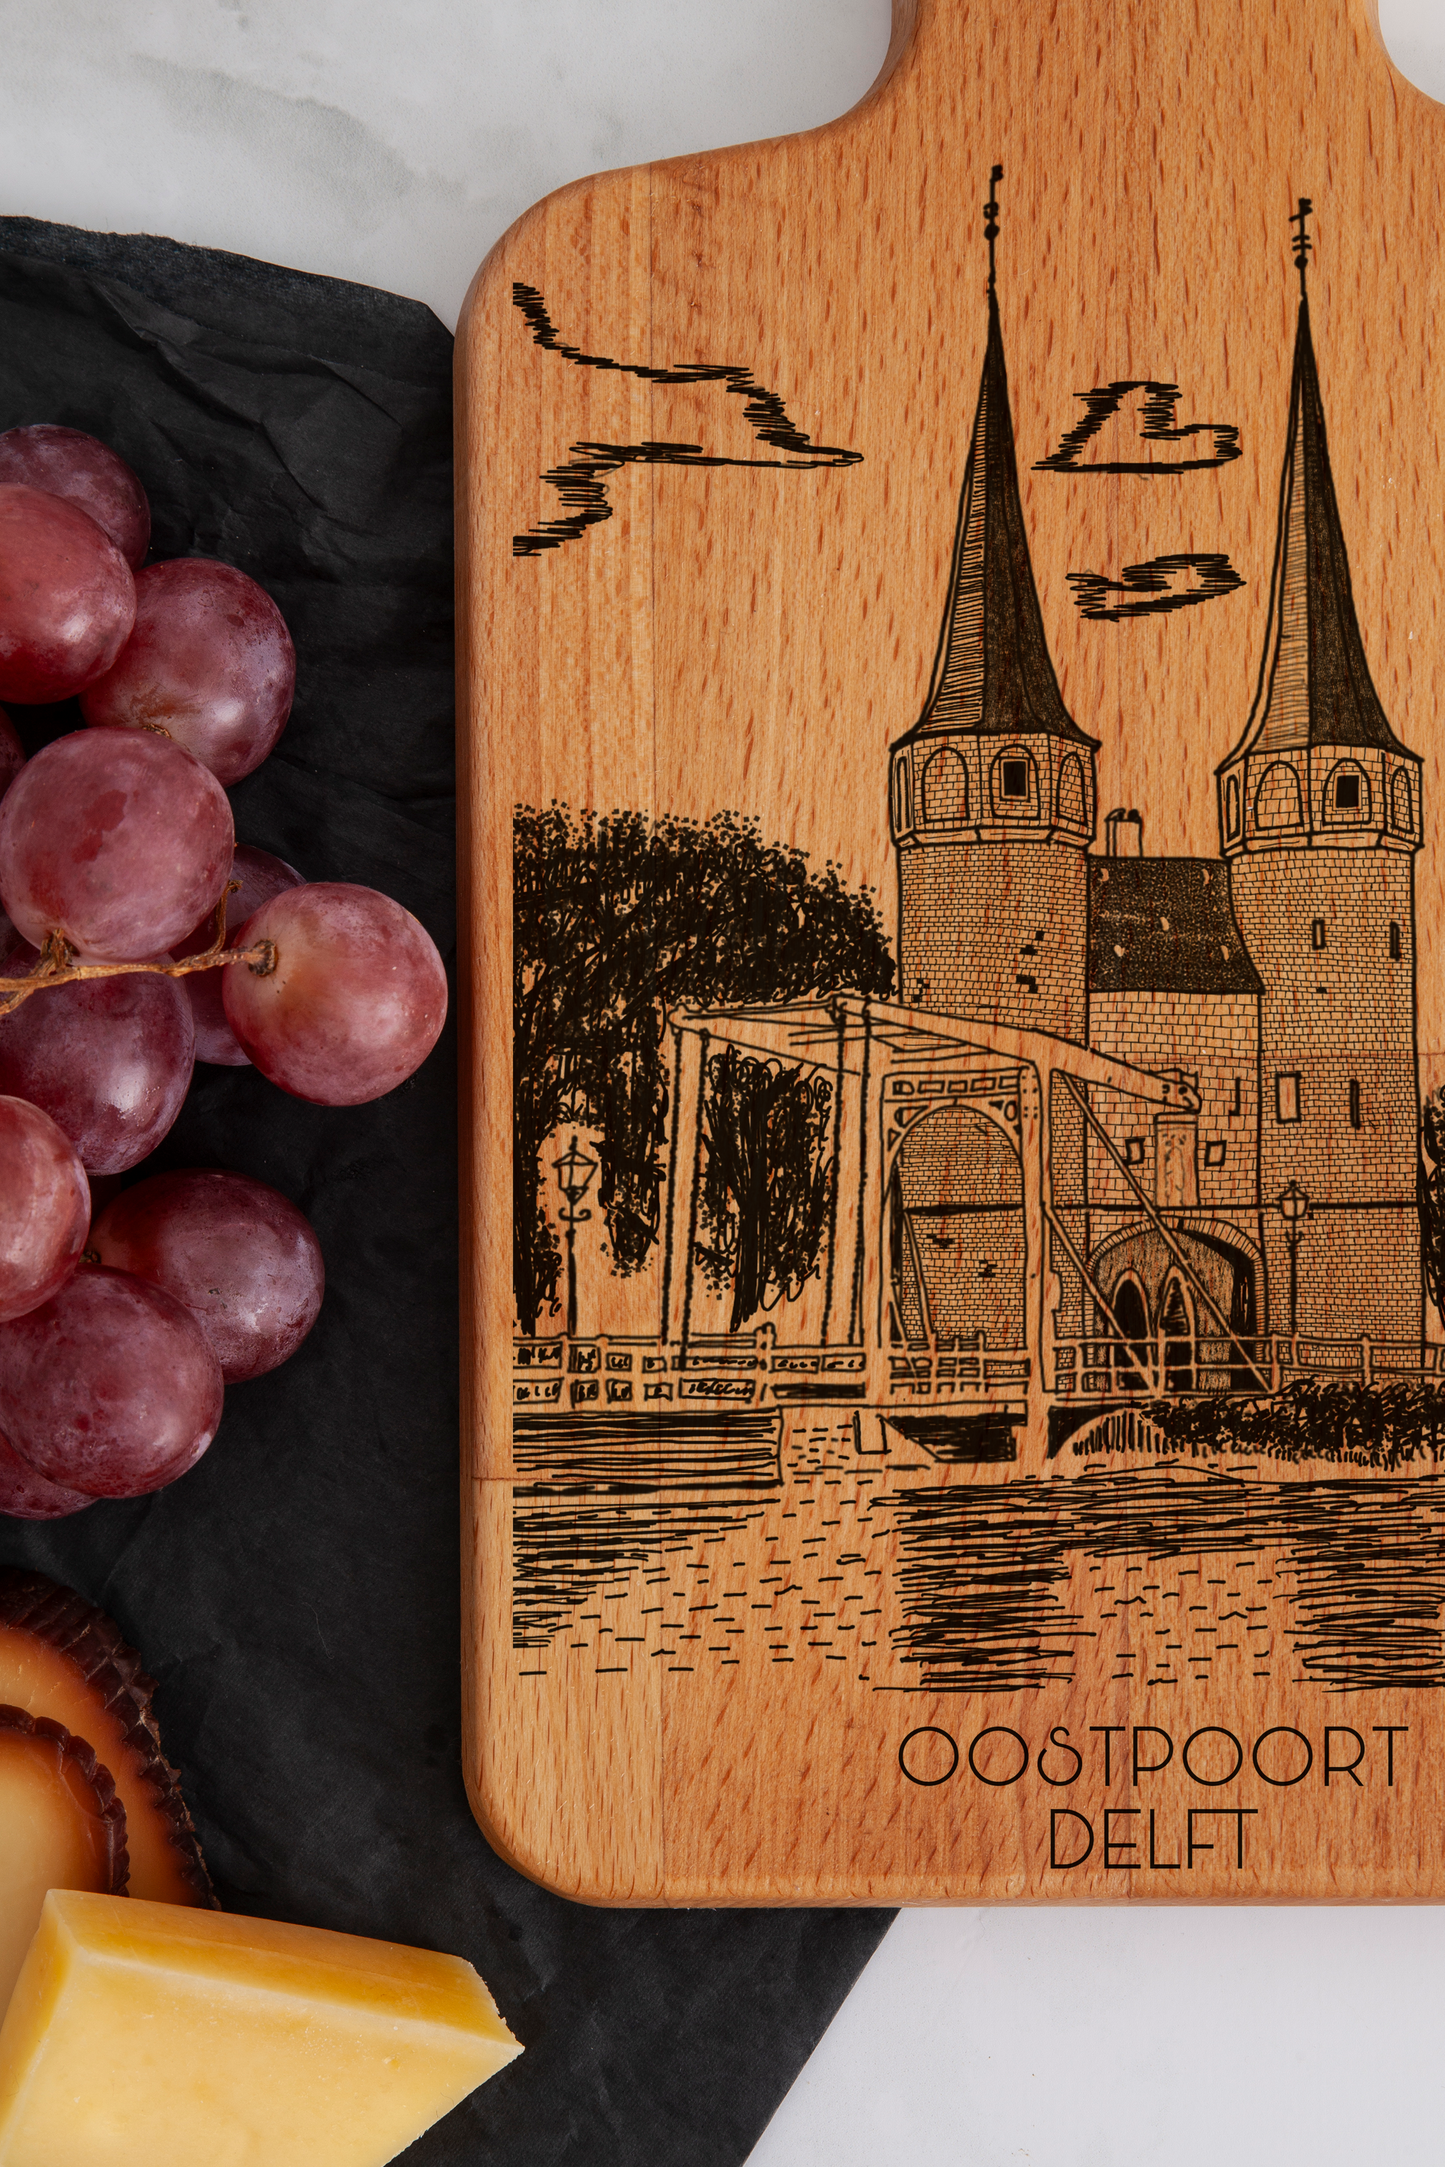 Delft, Oostpoort, cheese board, close-up